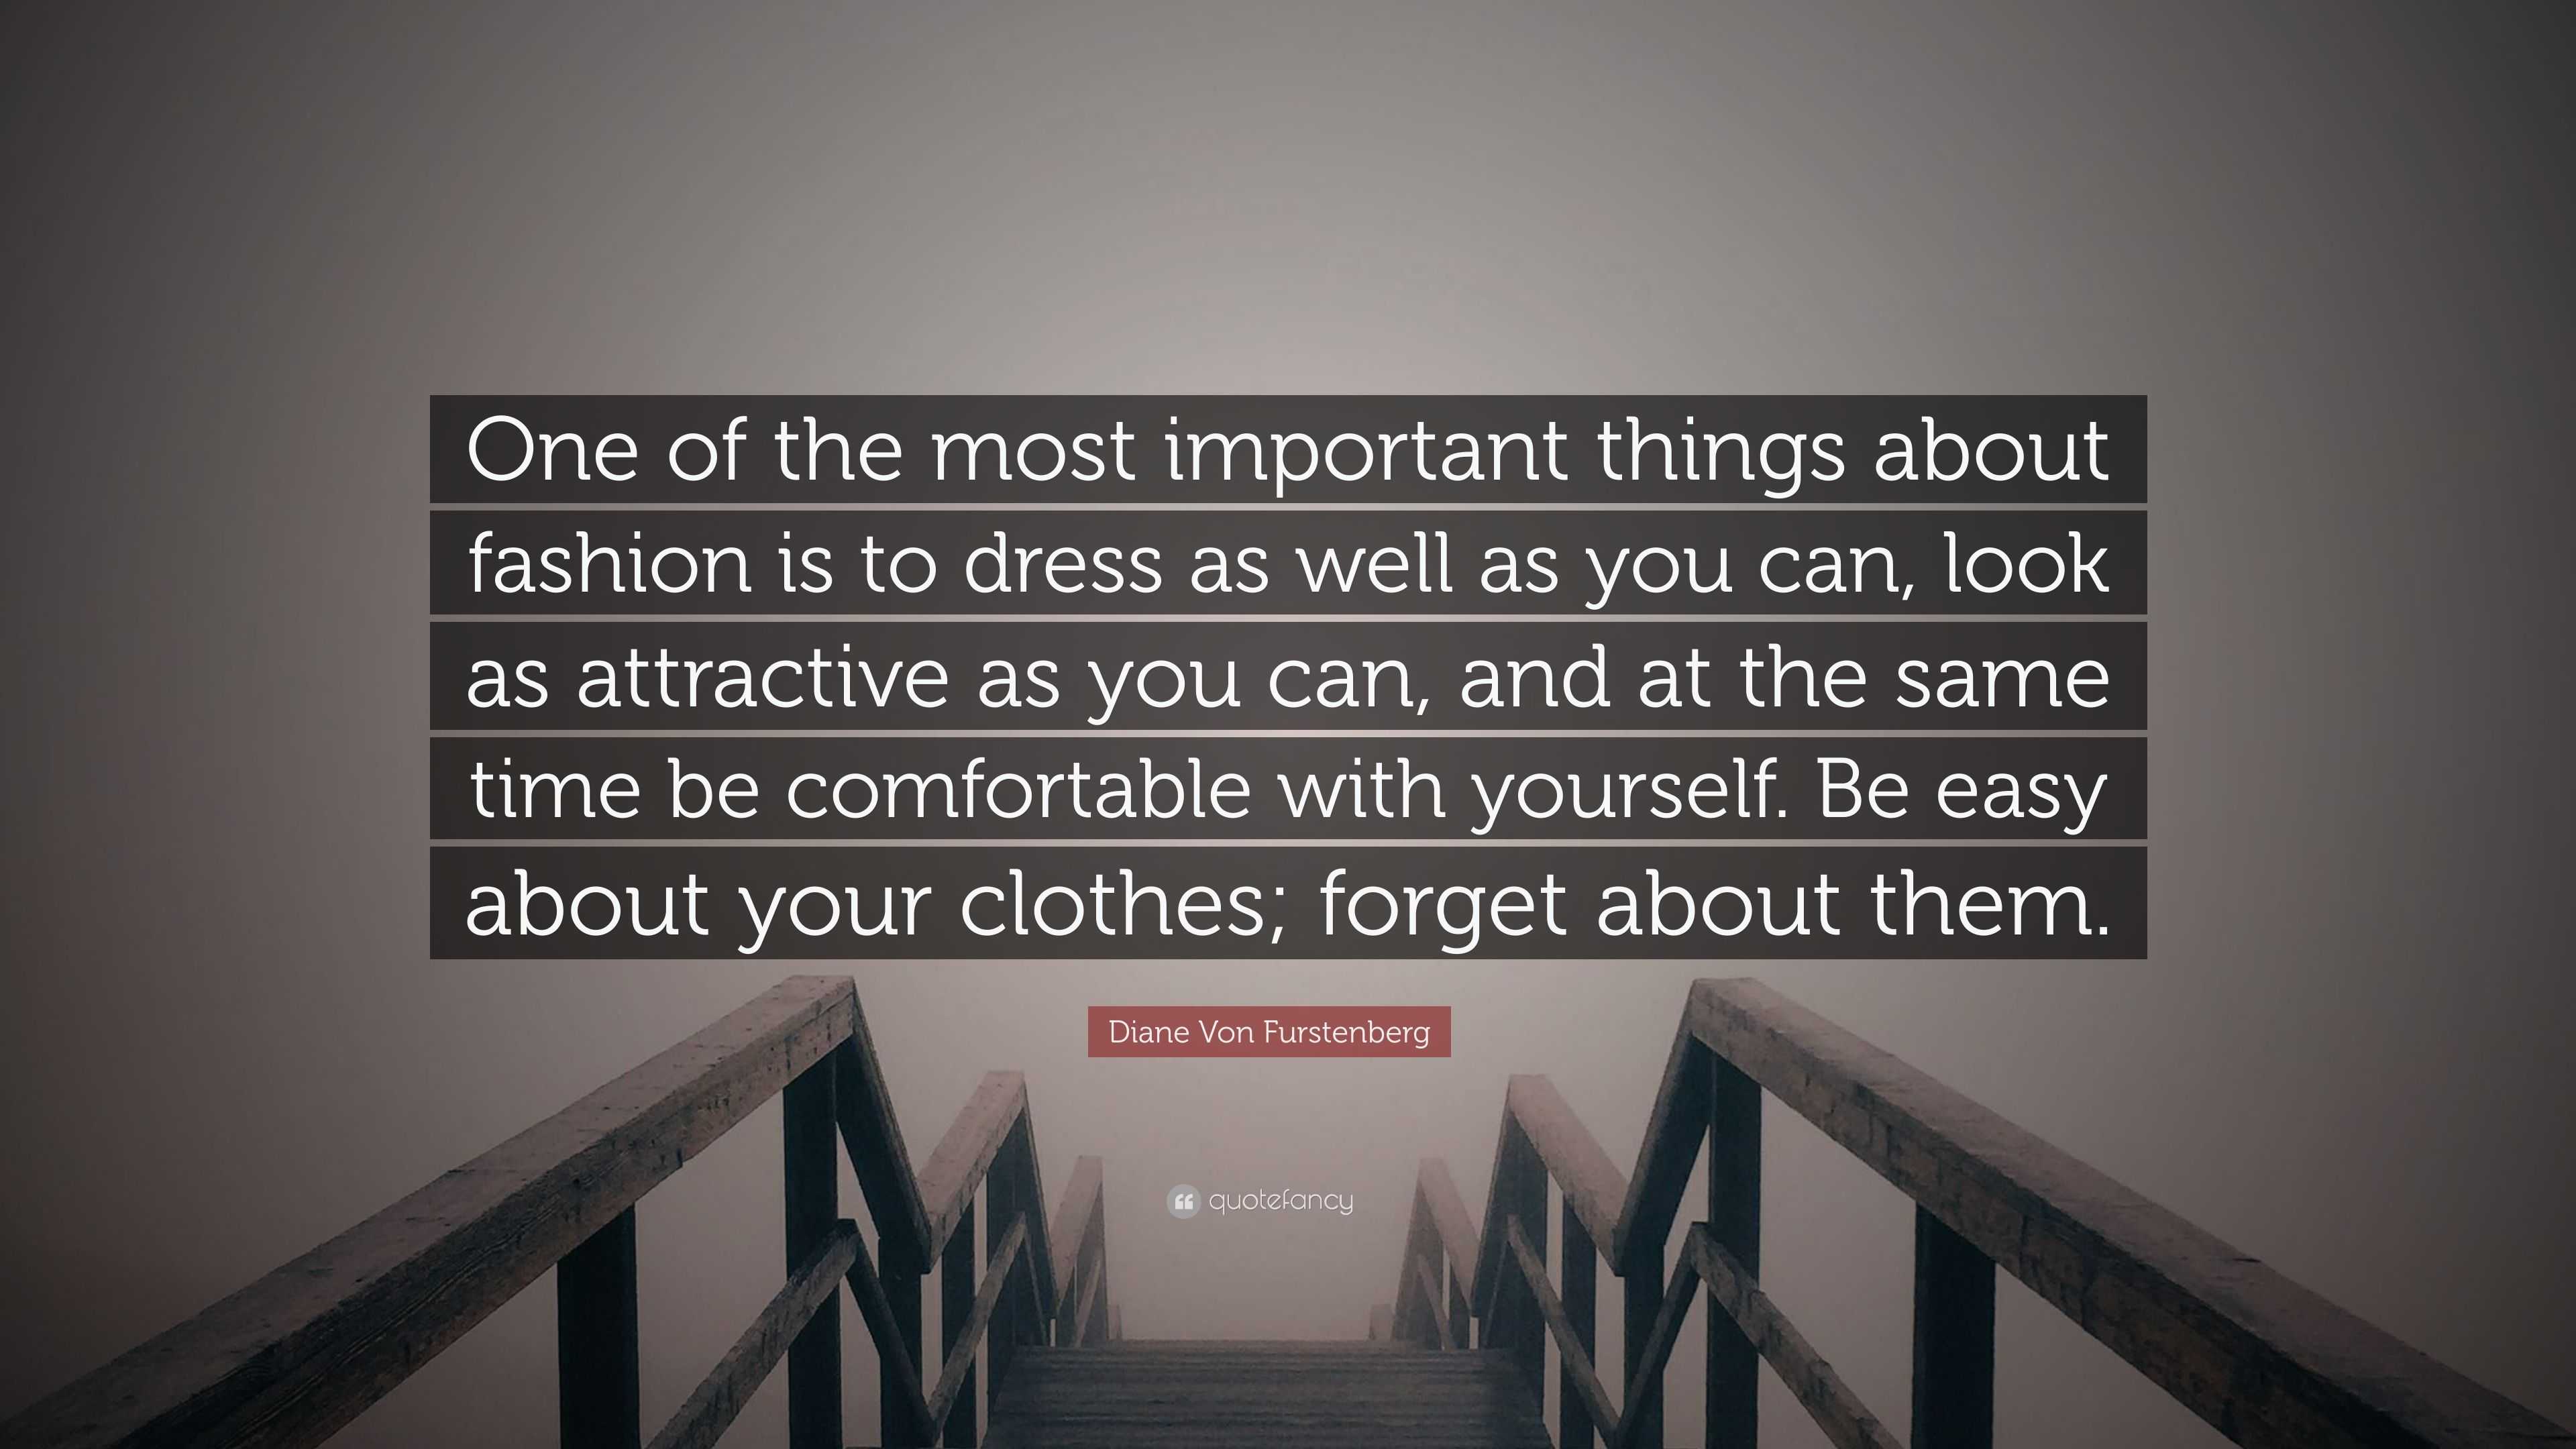 Diane Von Furstenberg Quote: “One of the most important things